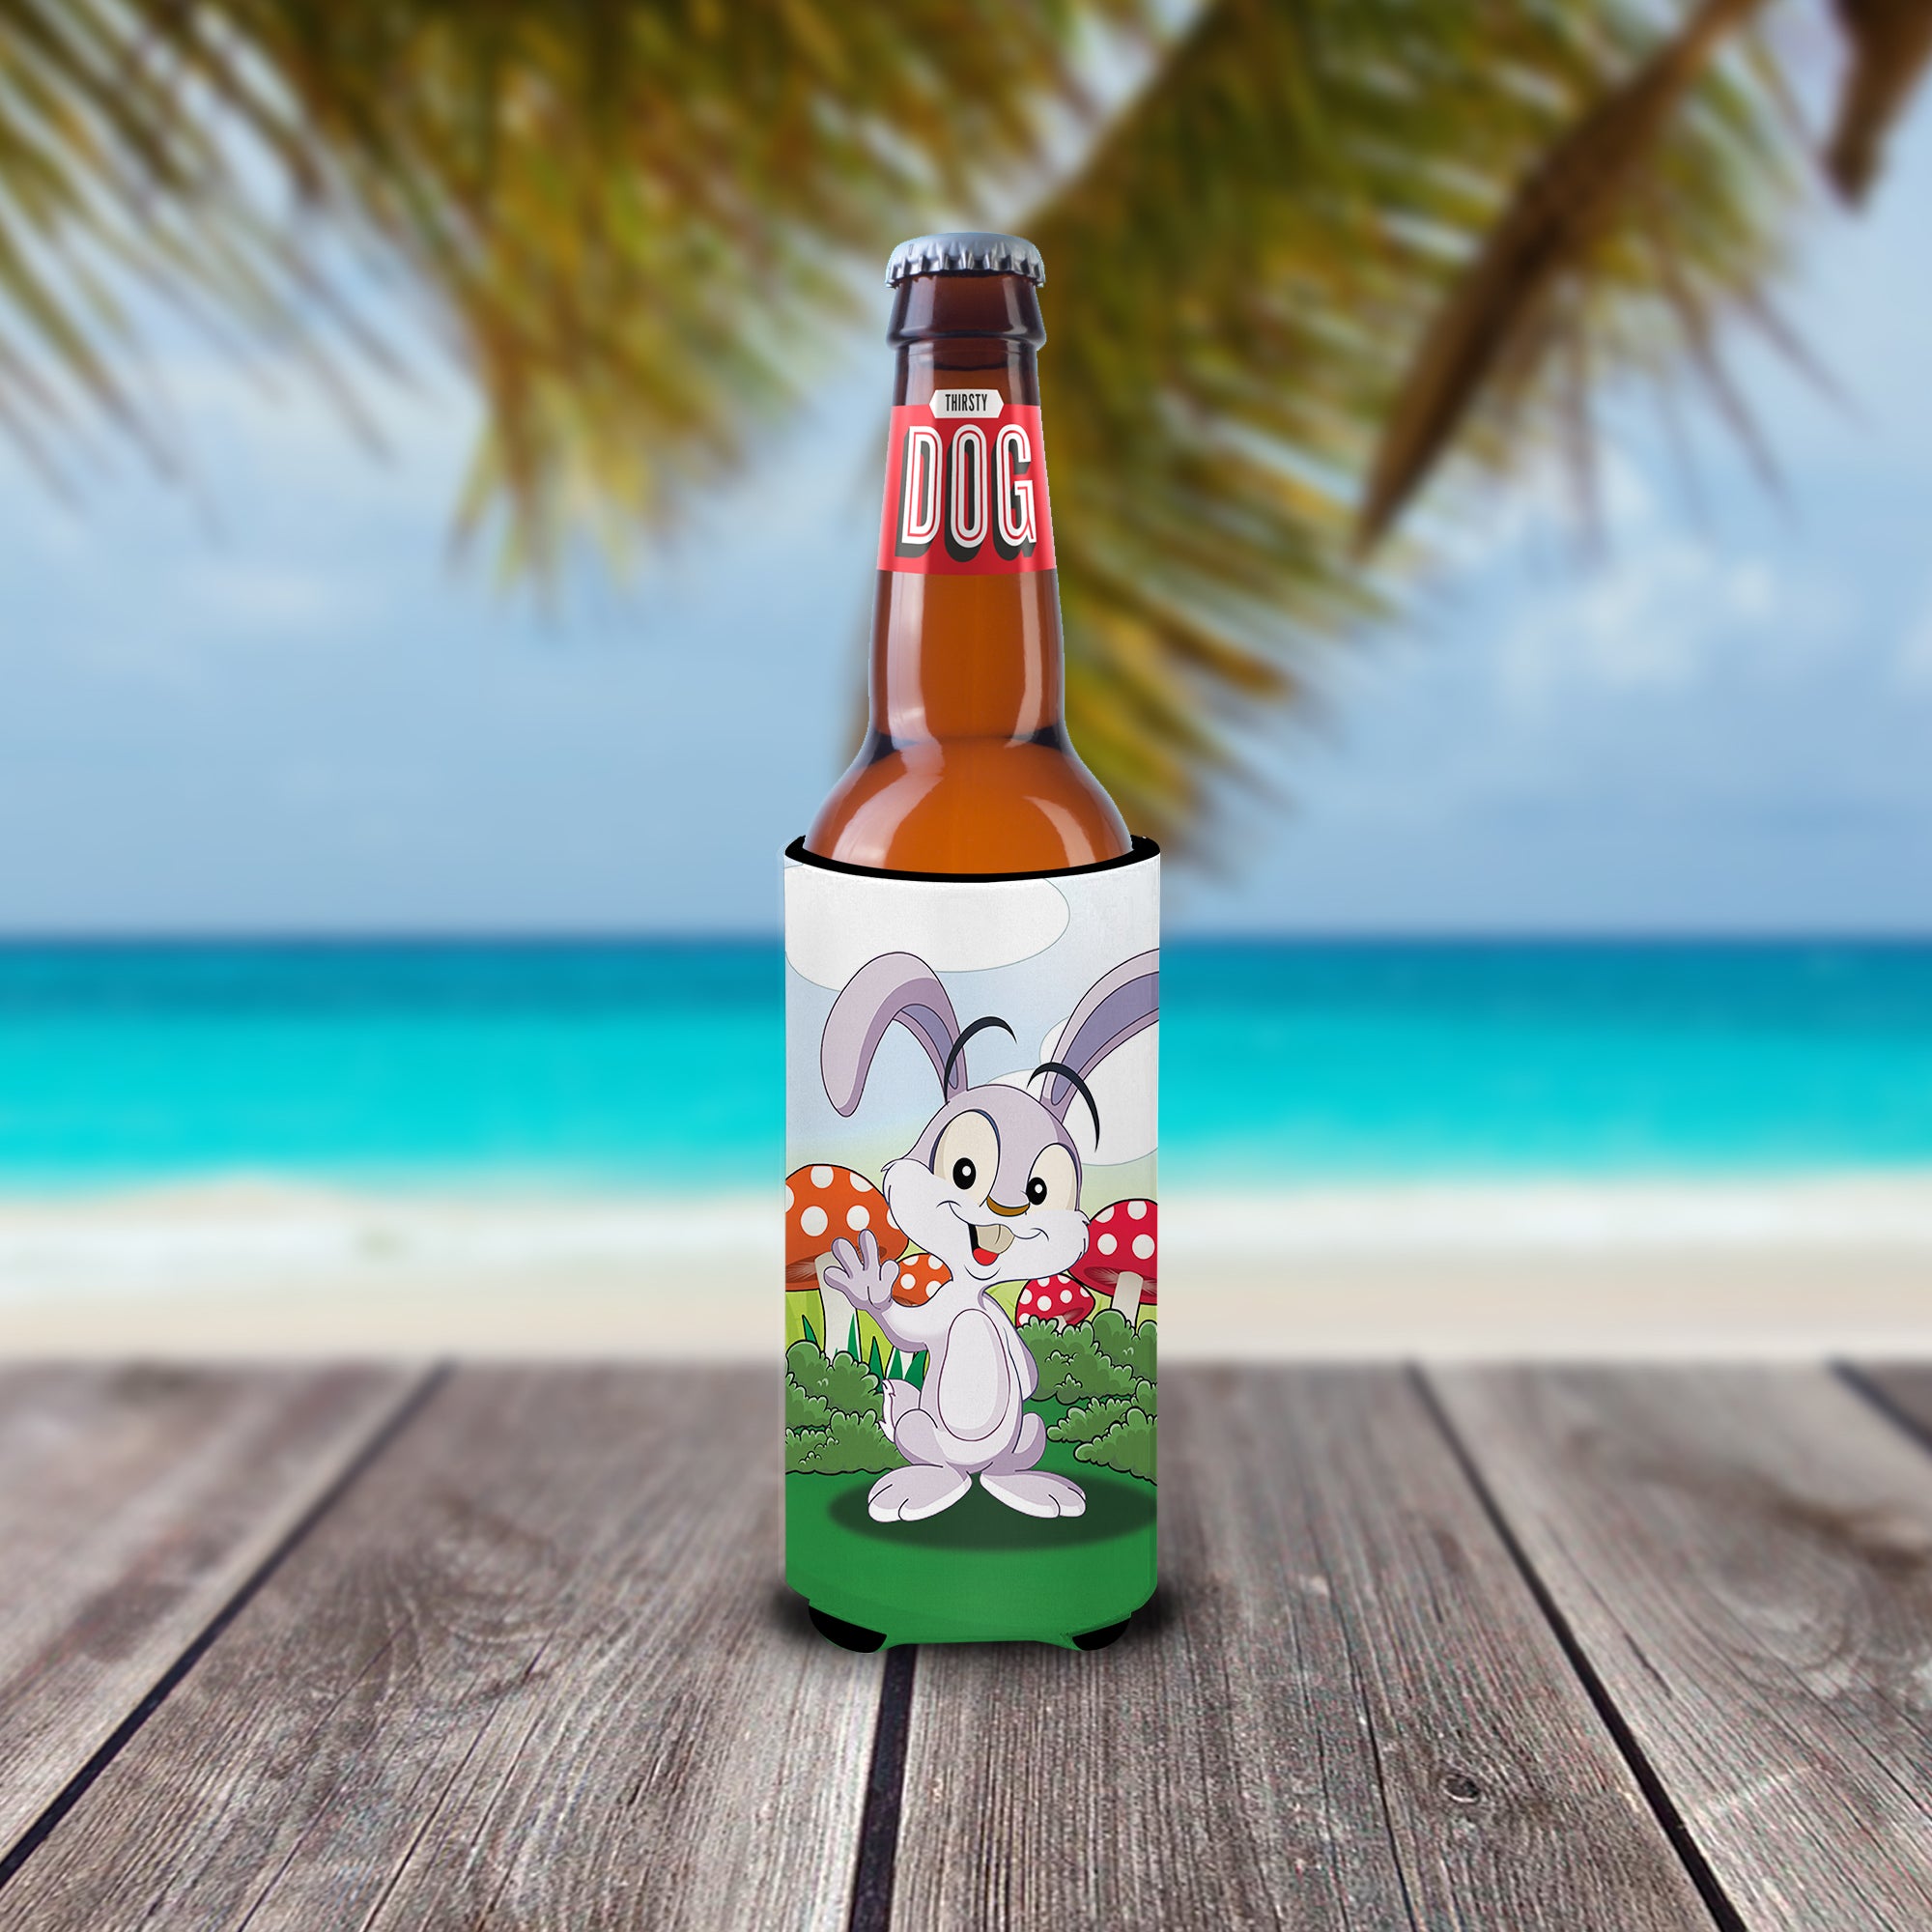 Bunny Rabbit in Mushrooms  Ultra Beverage Insulators for slim cans APH7632MUK  the-store.com.